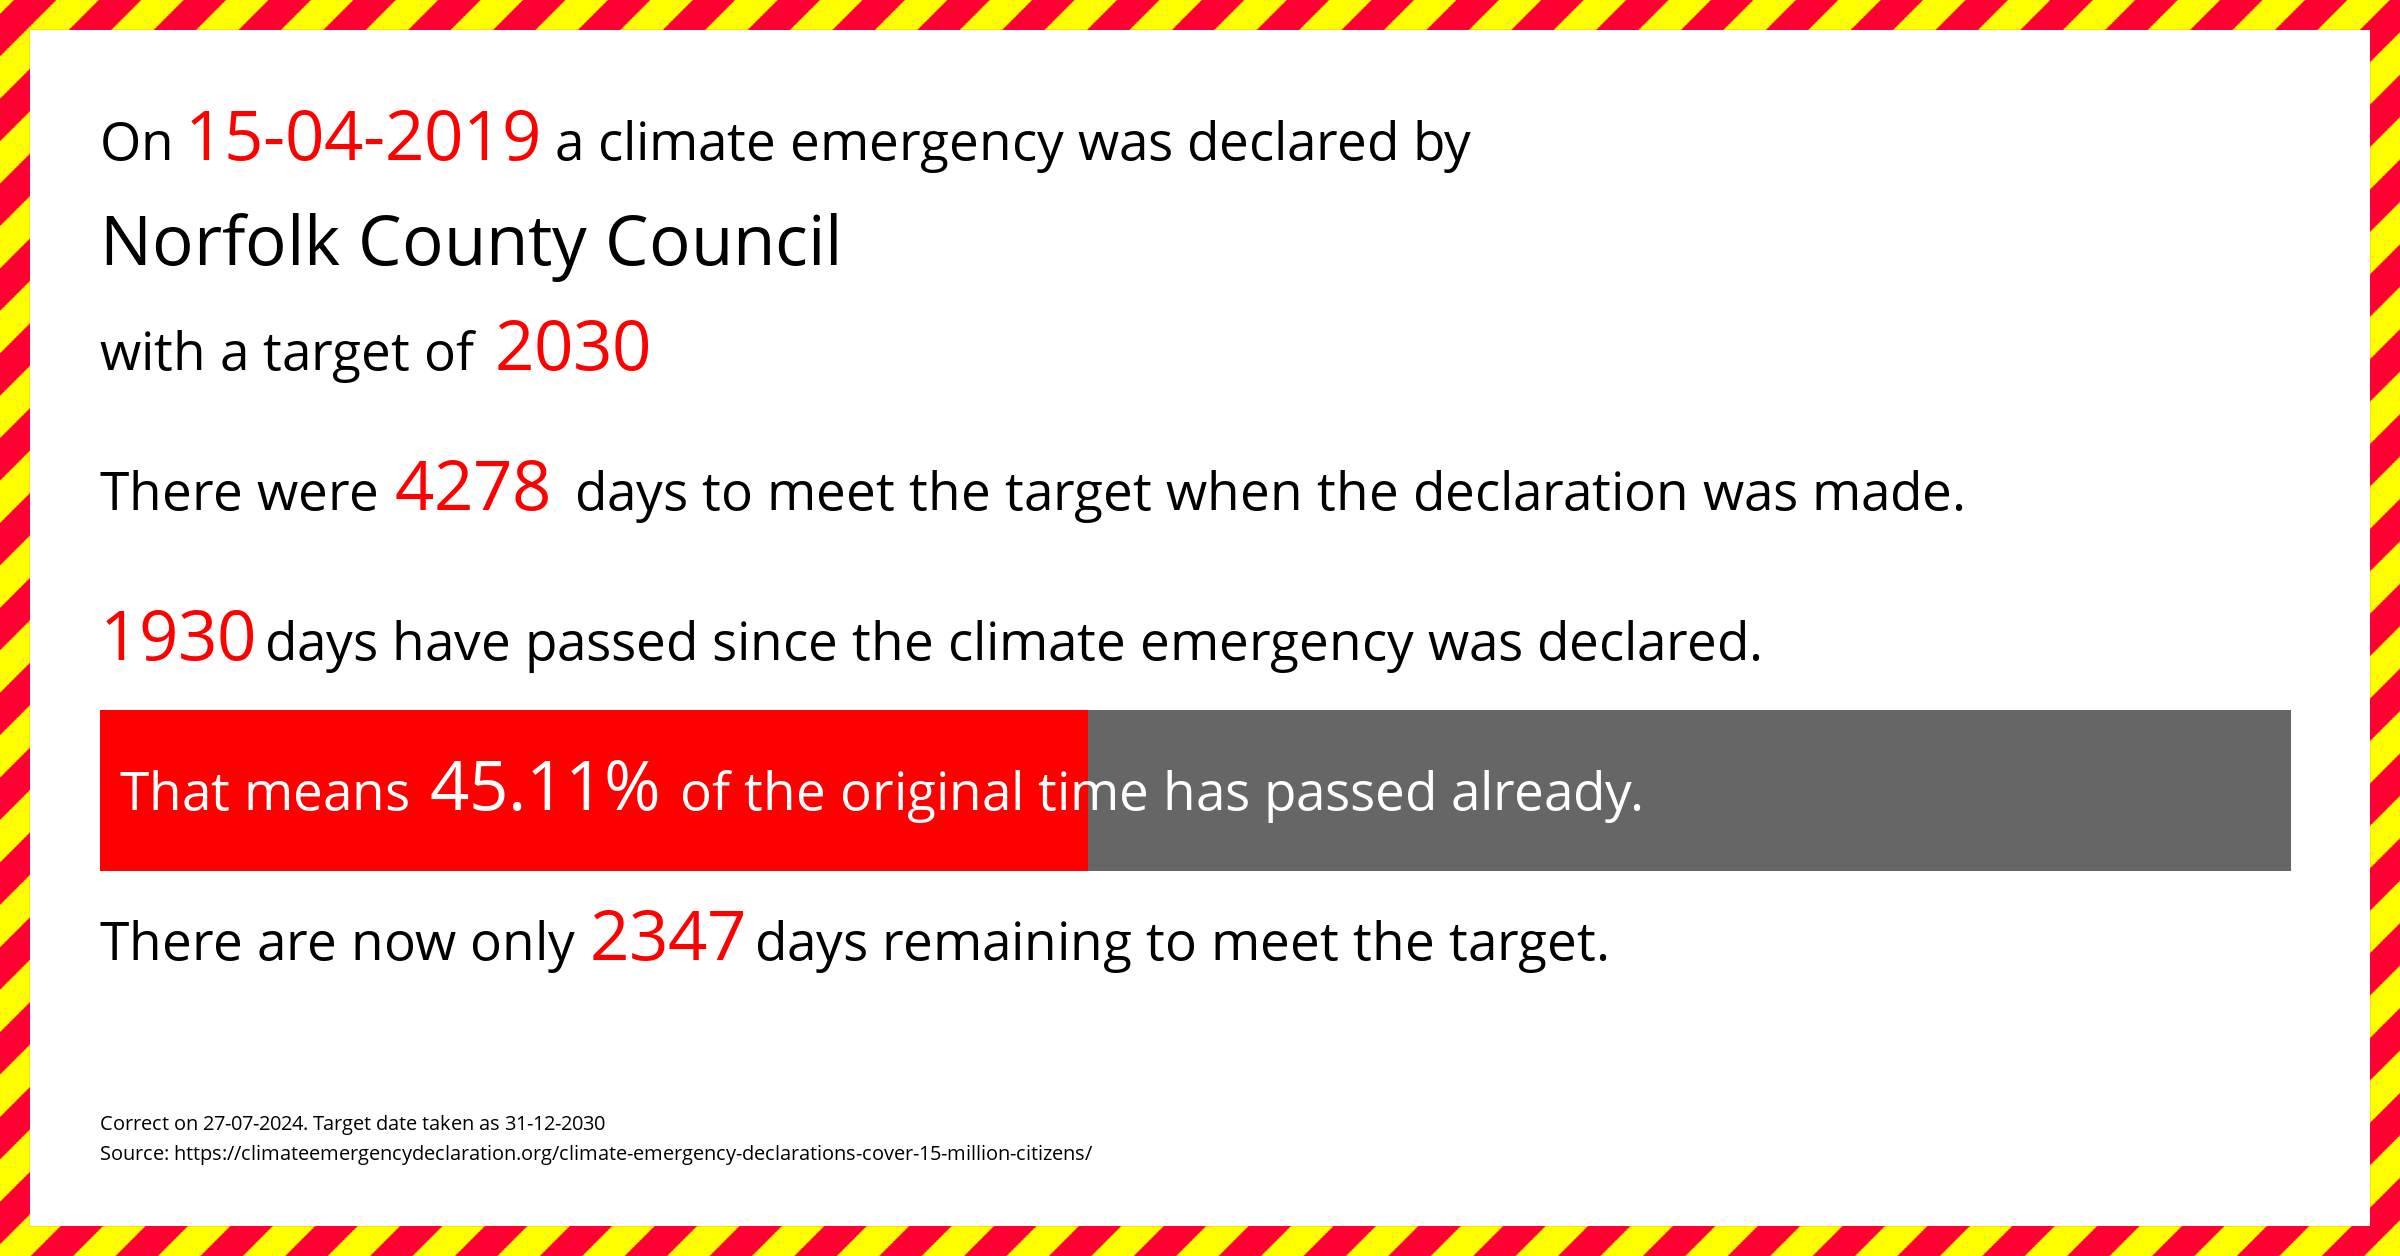 Norfolk County Council declared a Climate emergency on Monday 15th April 2019, with a target of 2030.